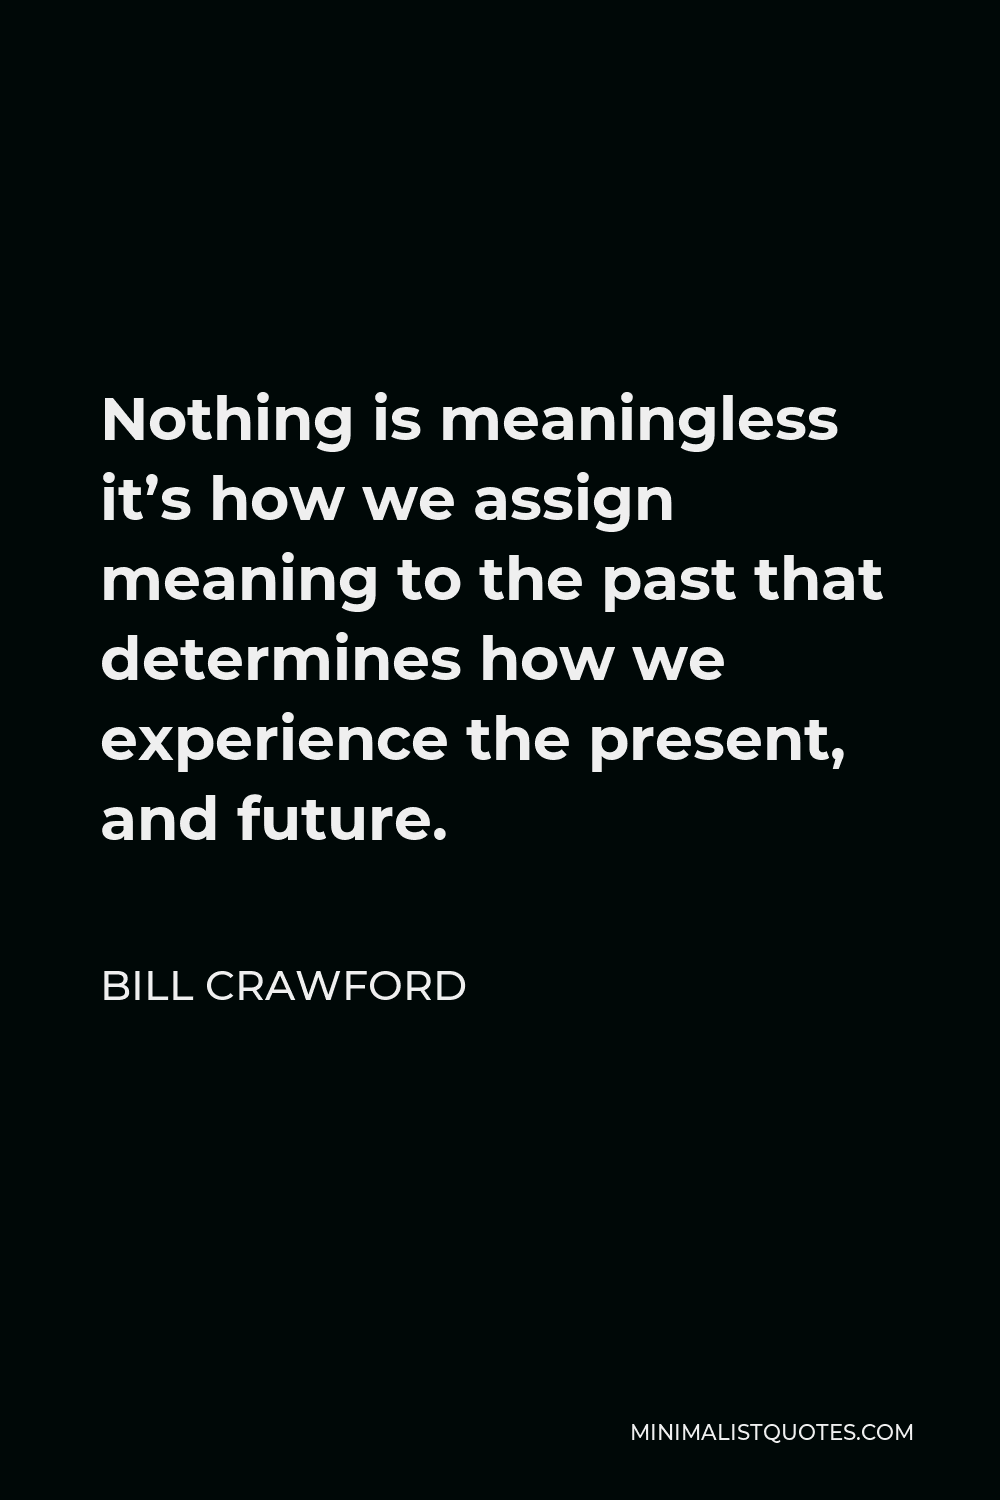 Bill Crawford Quote - Nothing is meaningless it’s how we assign meaning to the past that determines how we experience the present, and future.